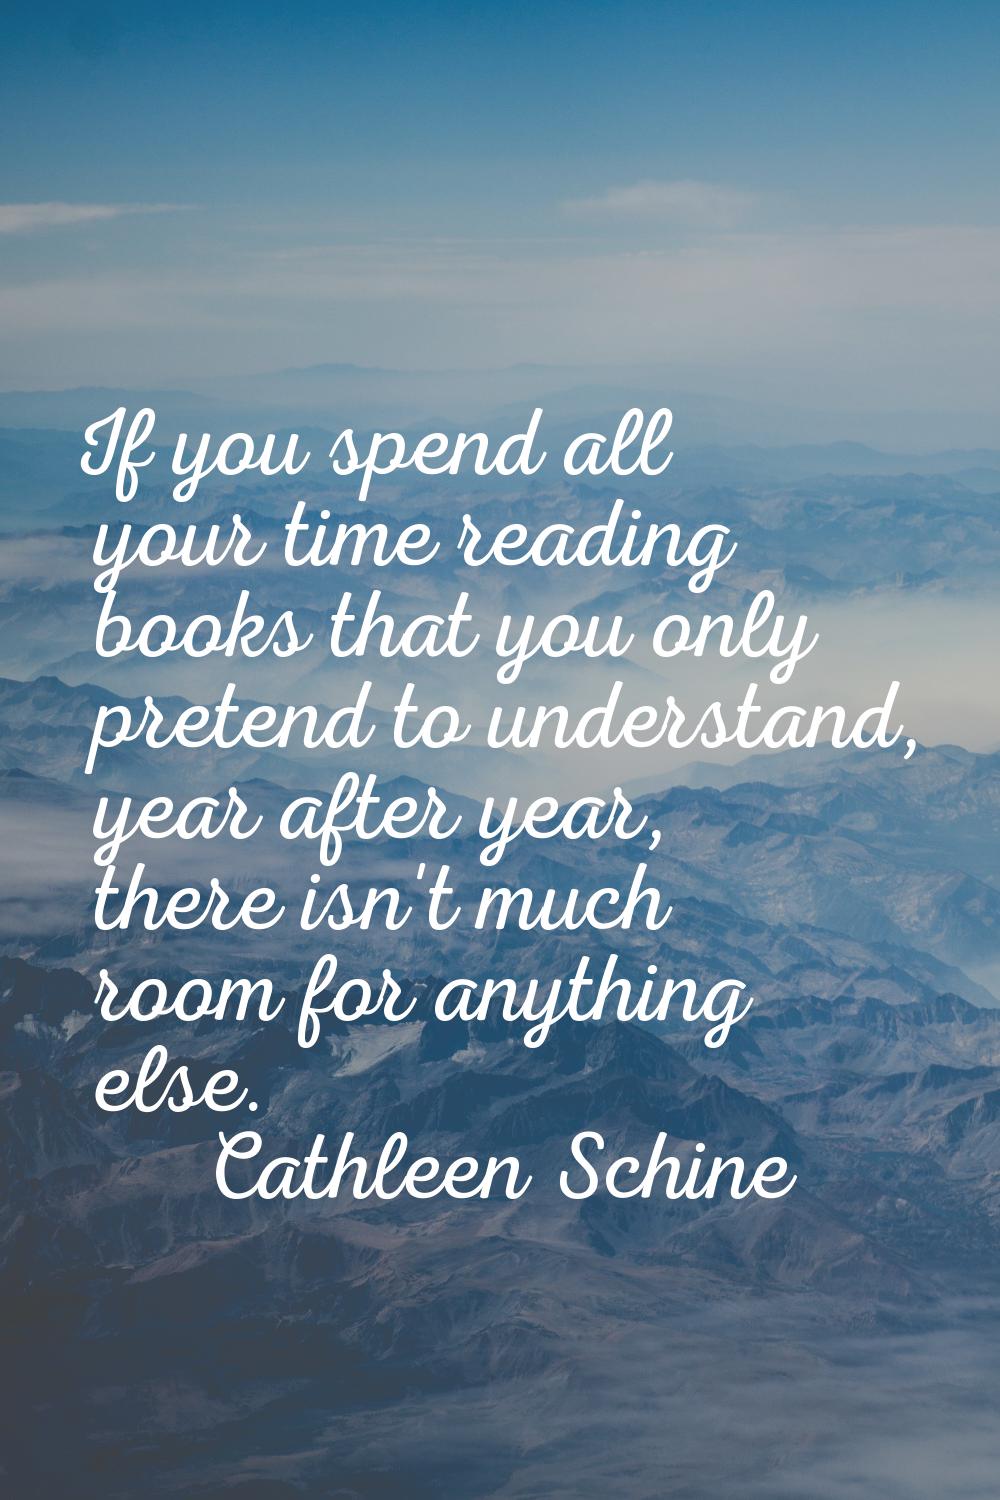 If you spend all your time reading books that you only pretend to understand, year after year, ther